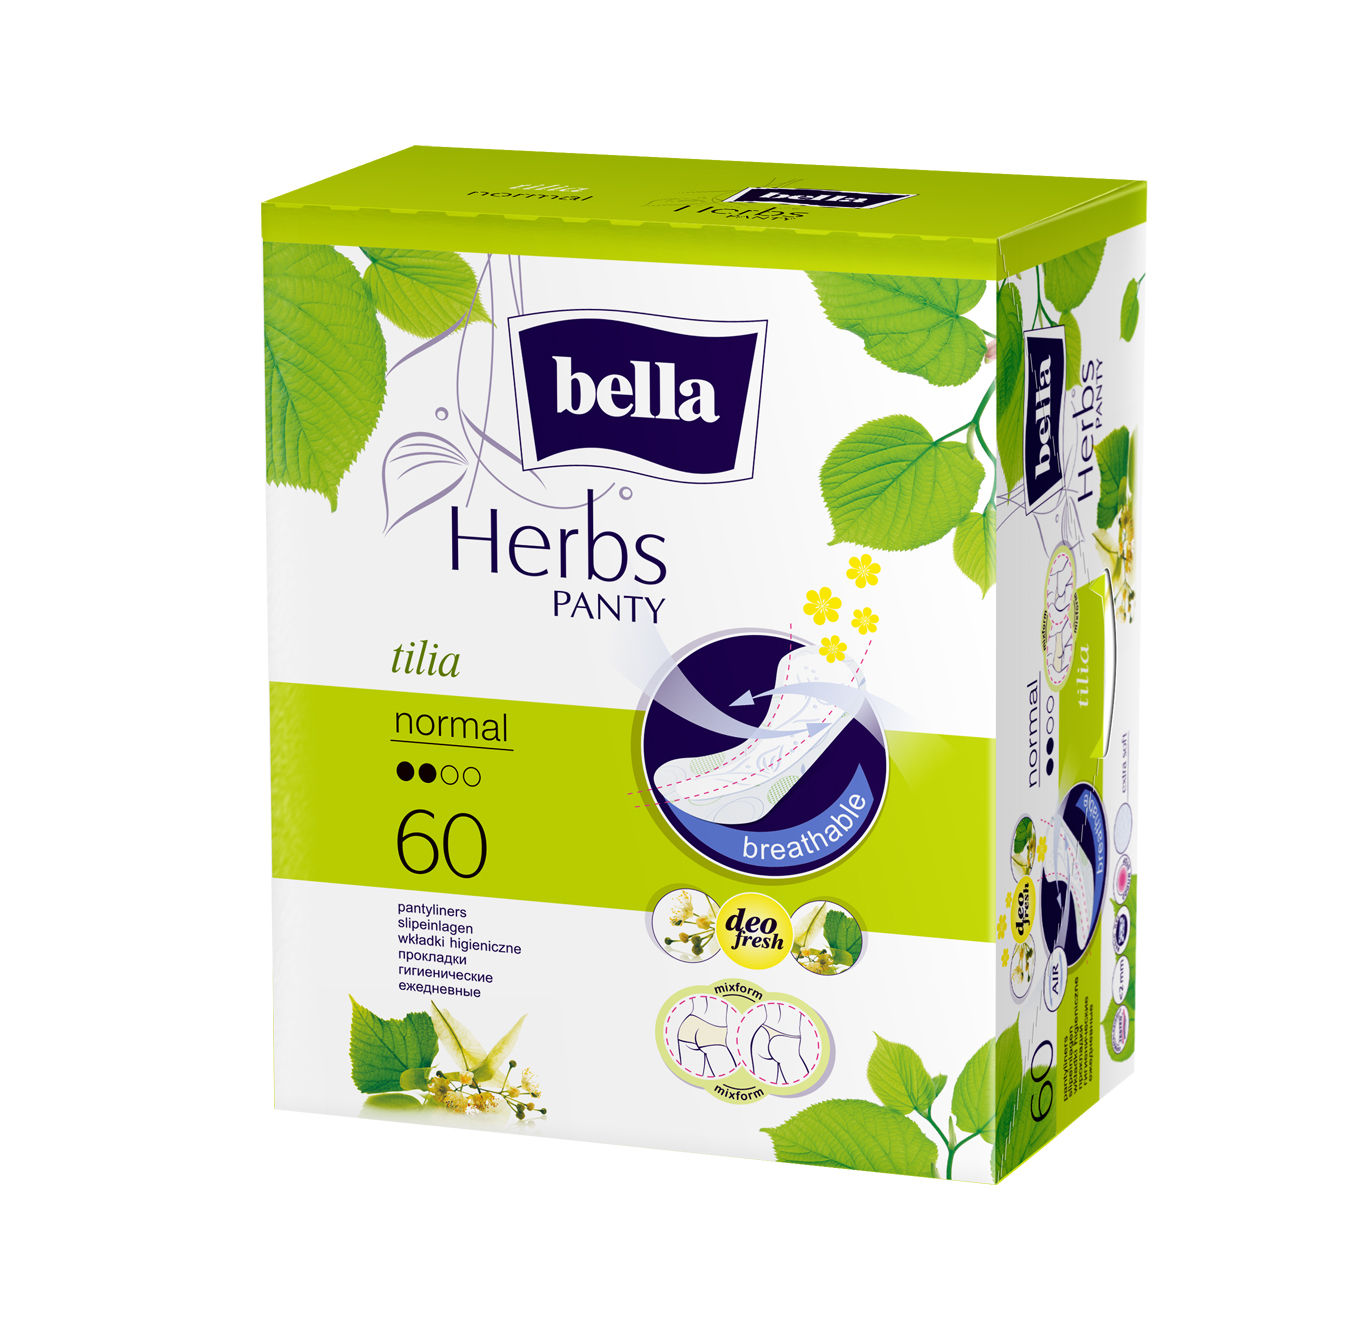 Bella Herbs Tilia Normal Breathable Normal Pantyliners